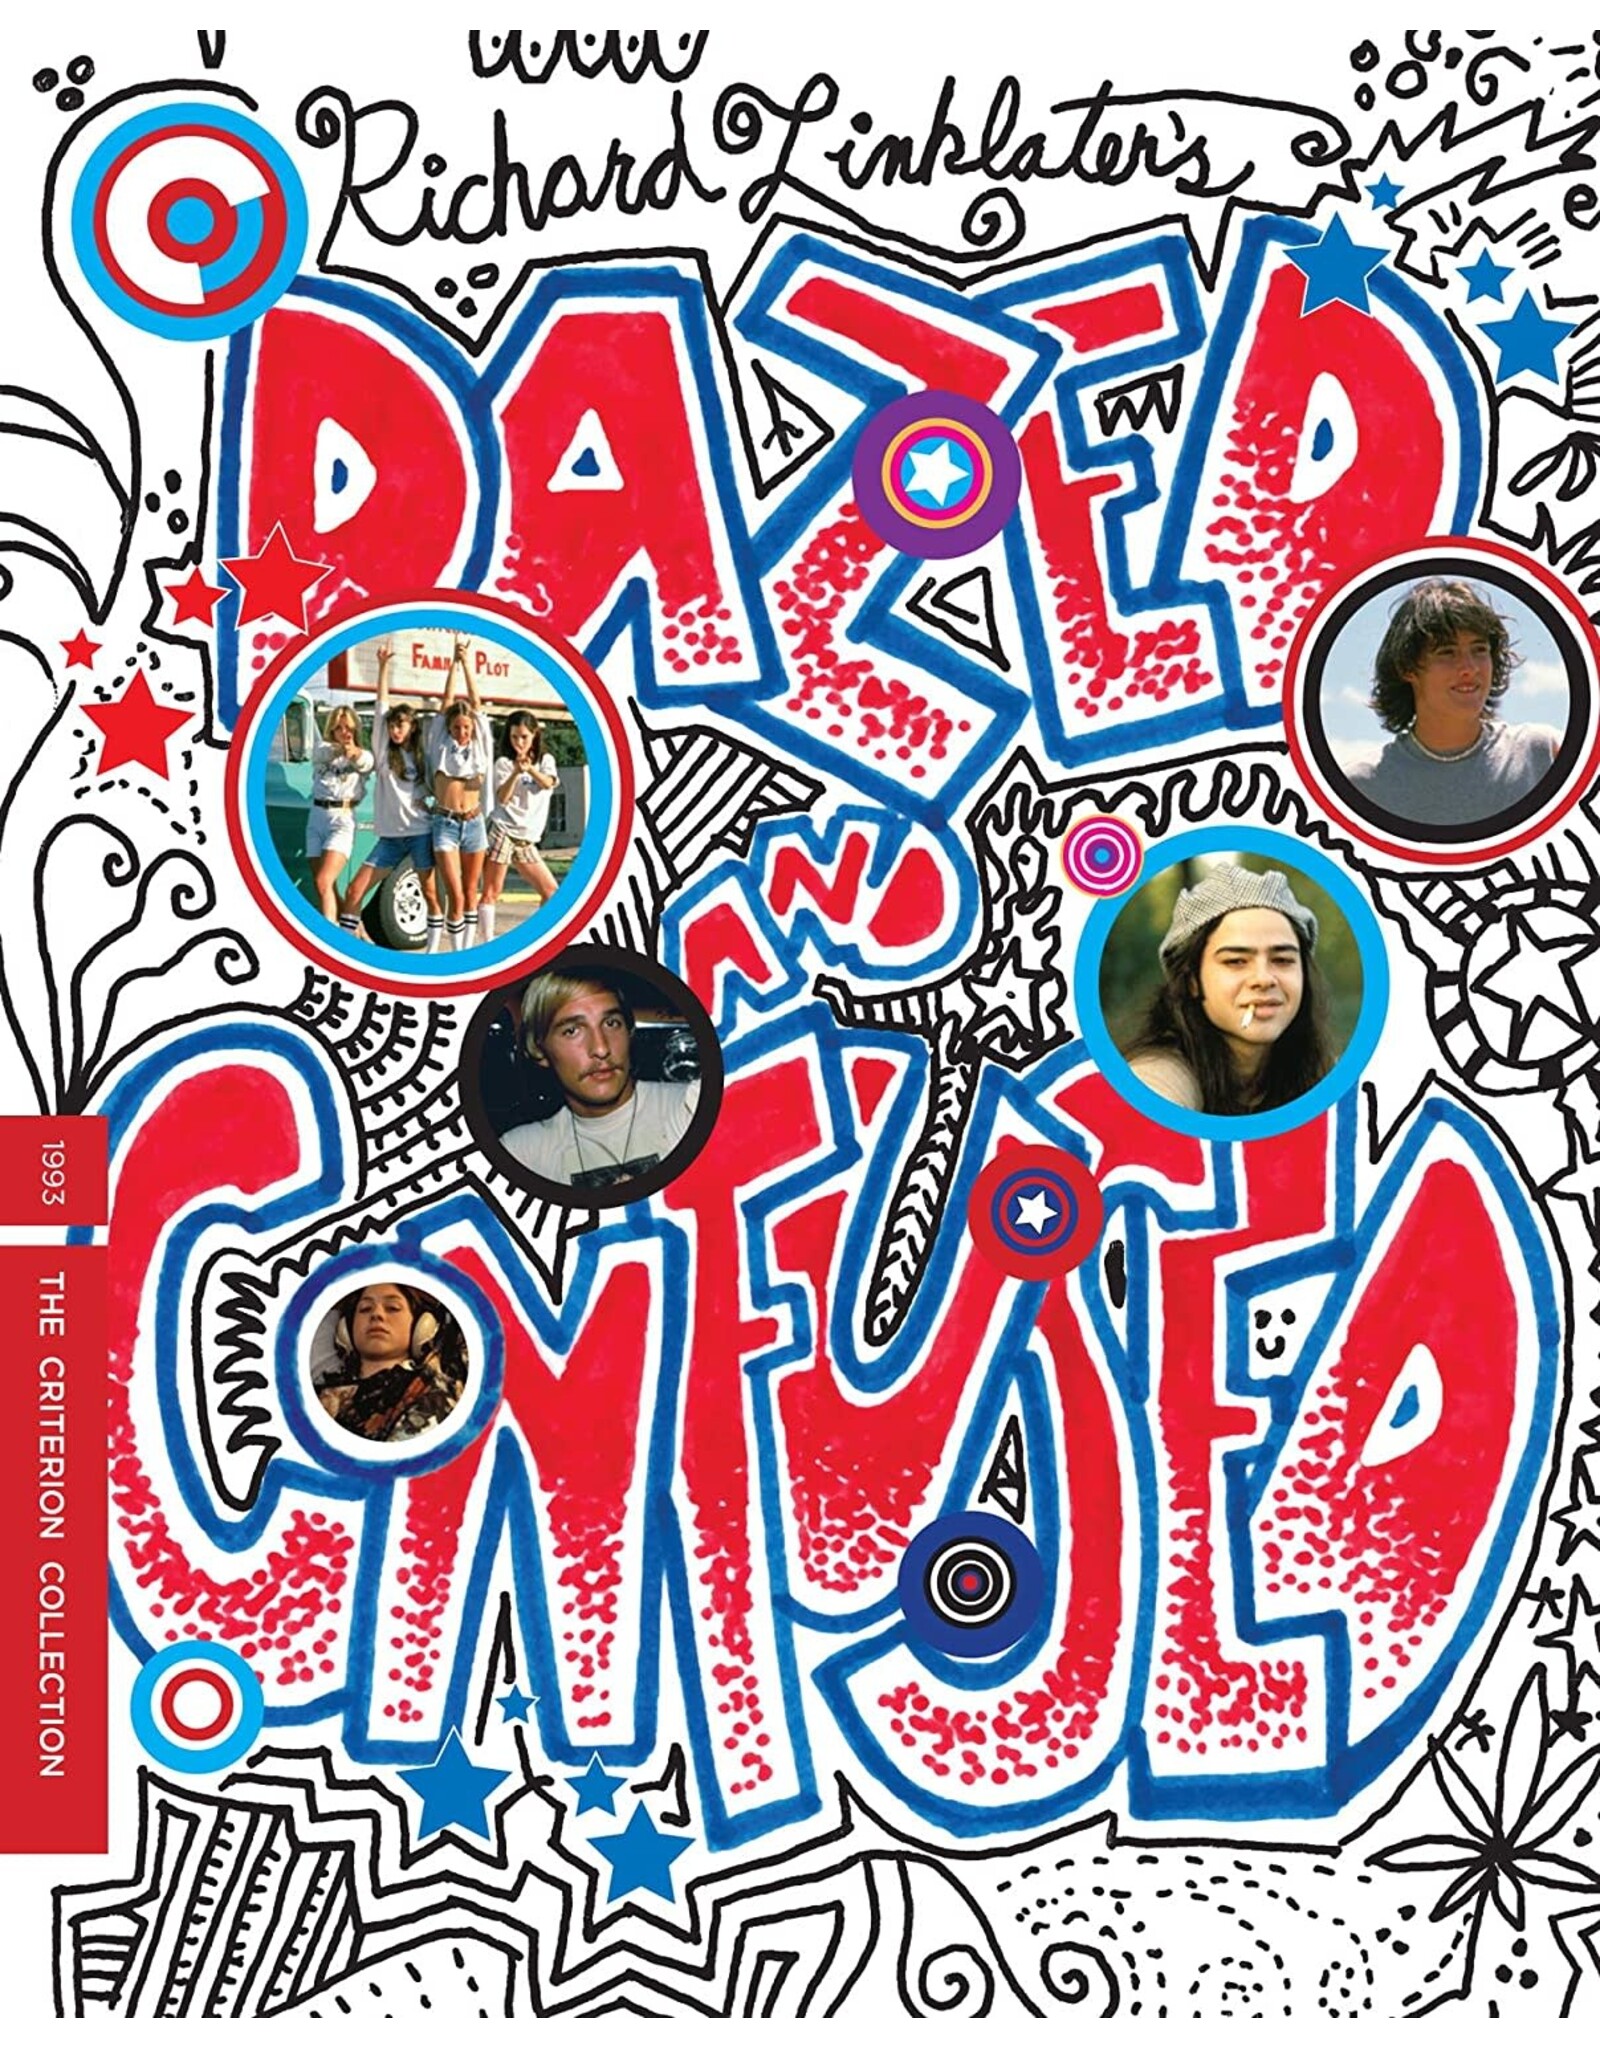 Criterion Collection Dazed and Confused - Criterion Collection (Brand New)